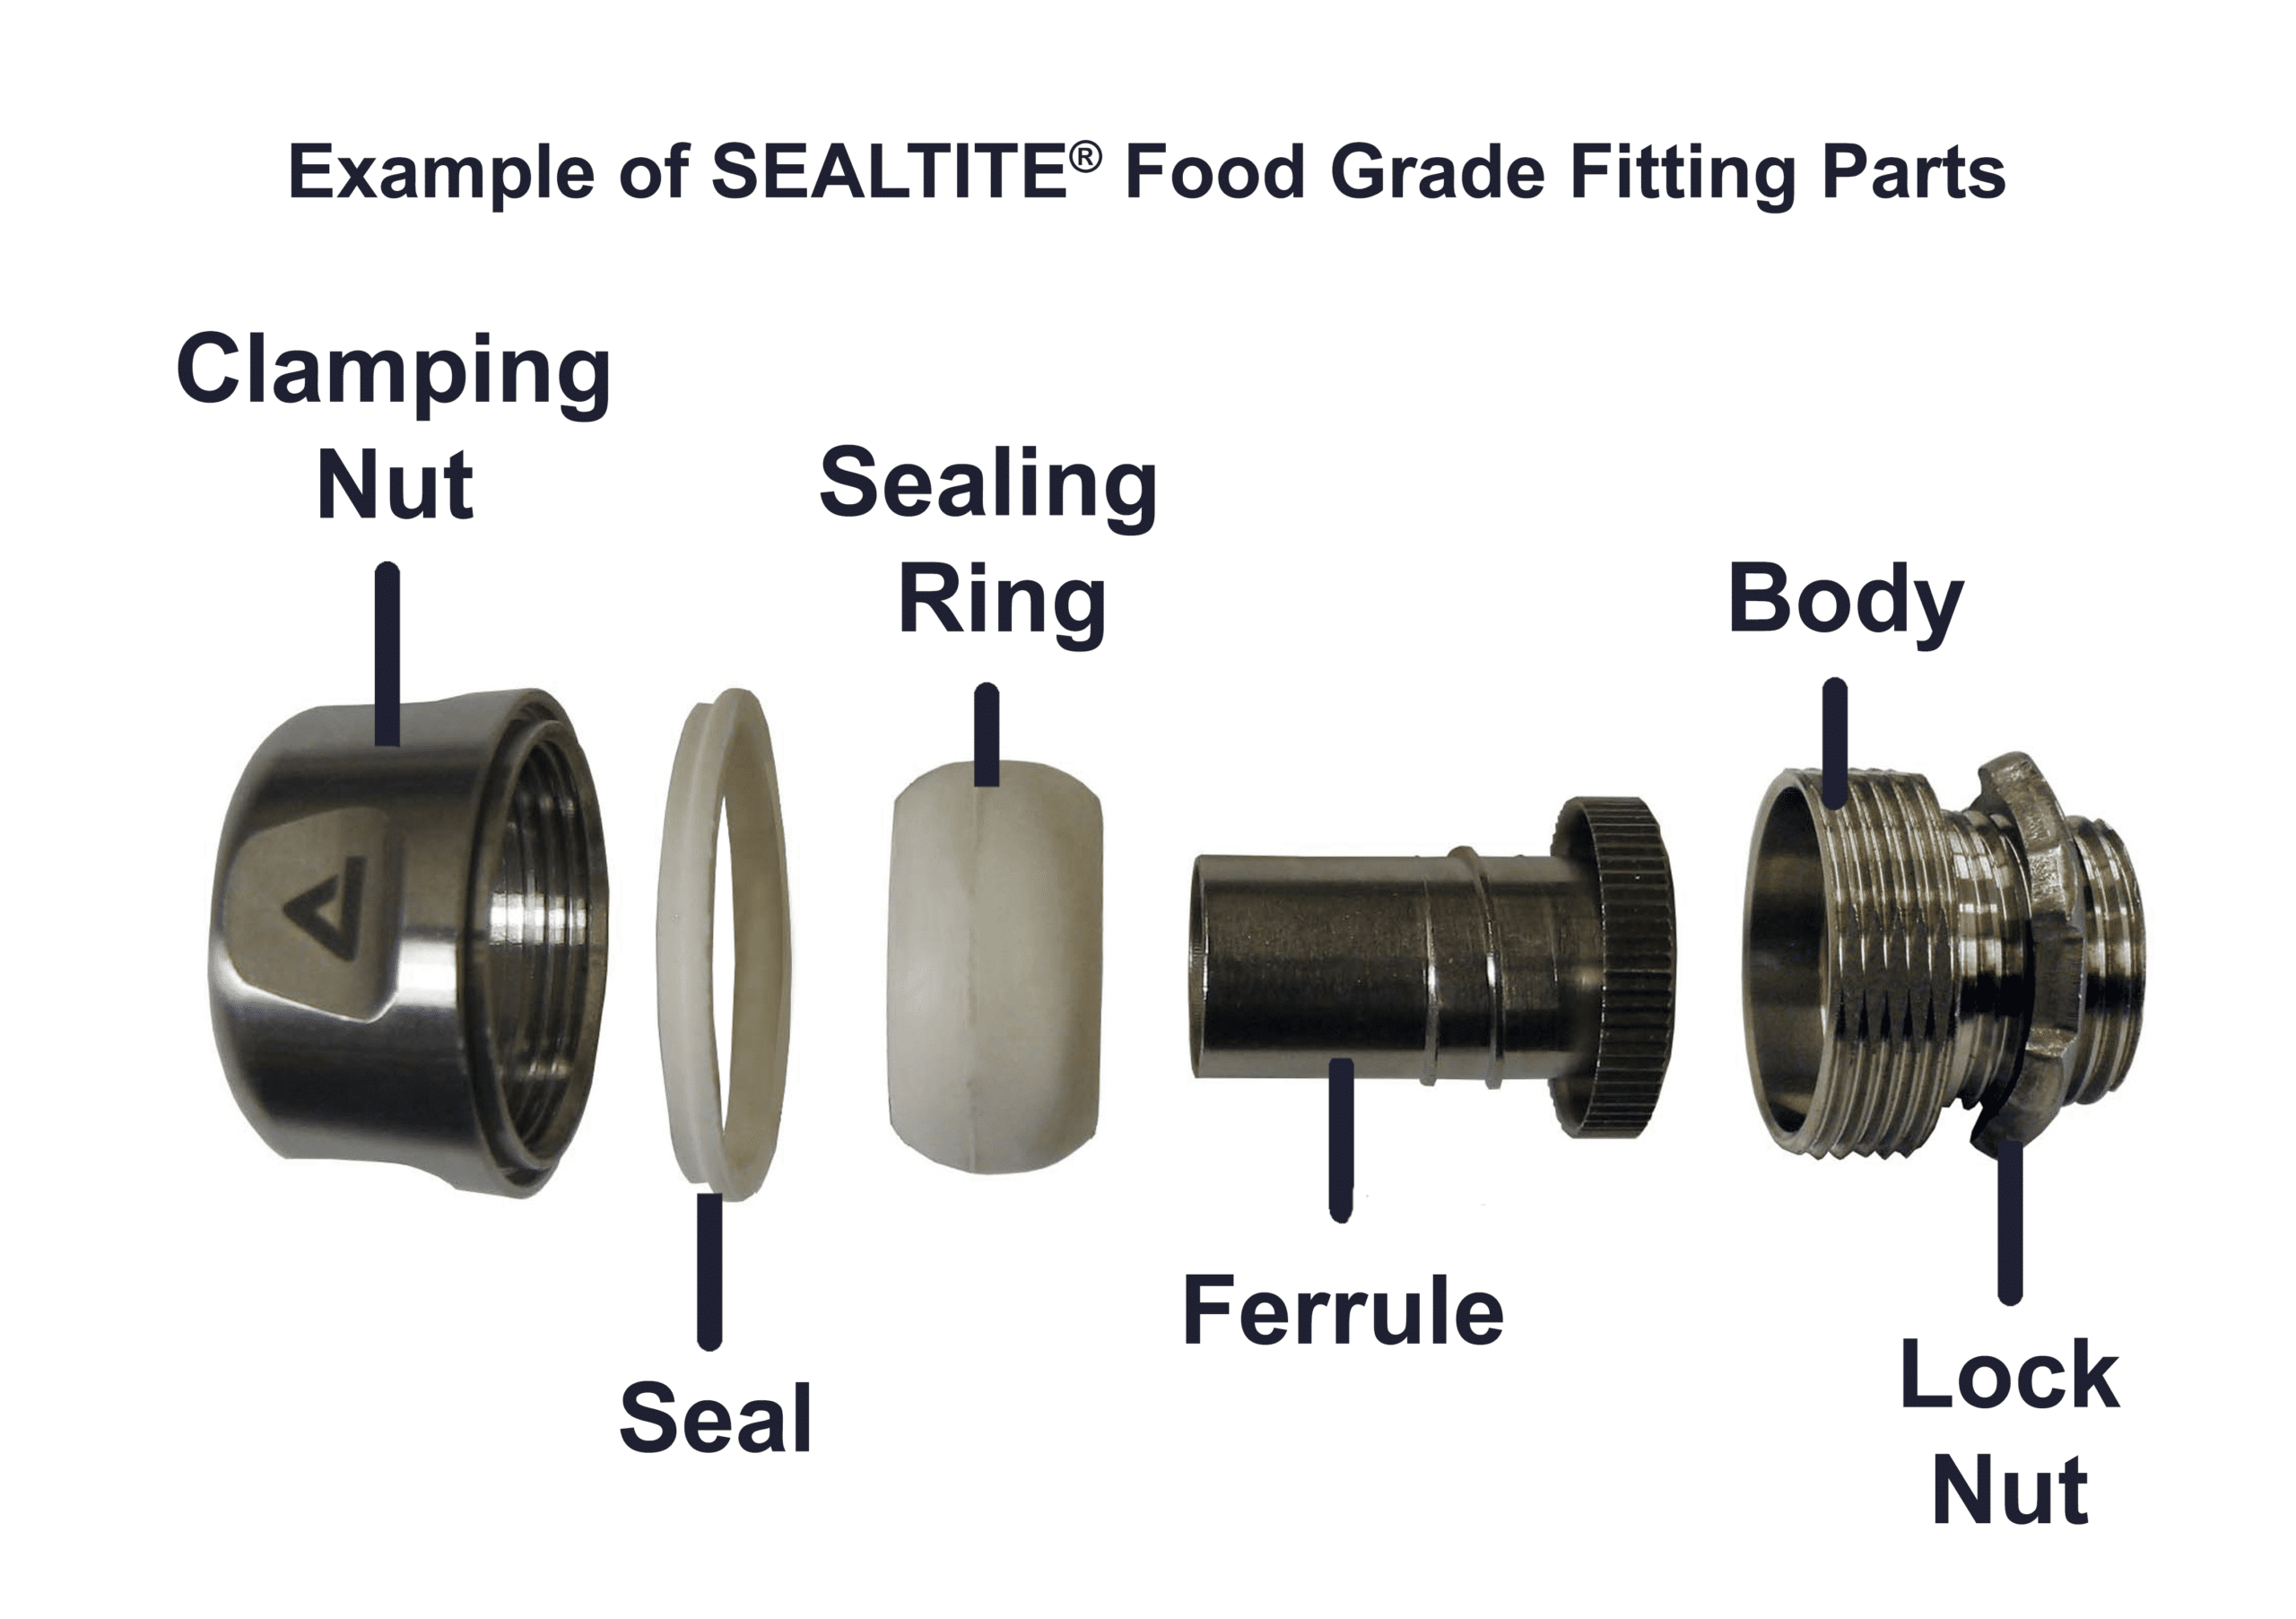 Parts in a SEALTITE® Food Grade Fitting